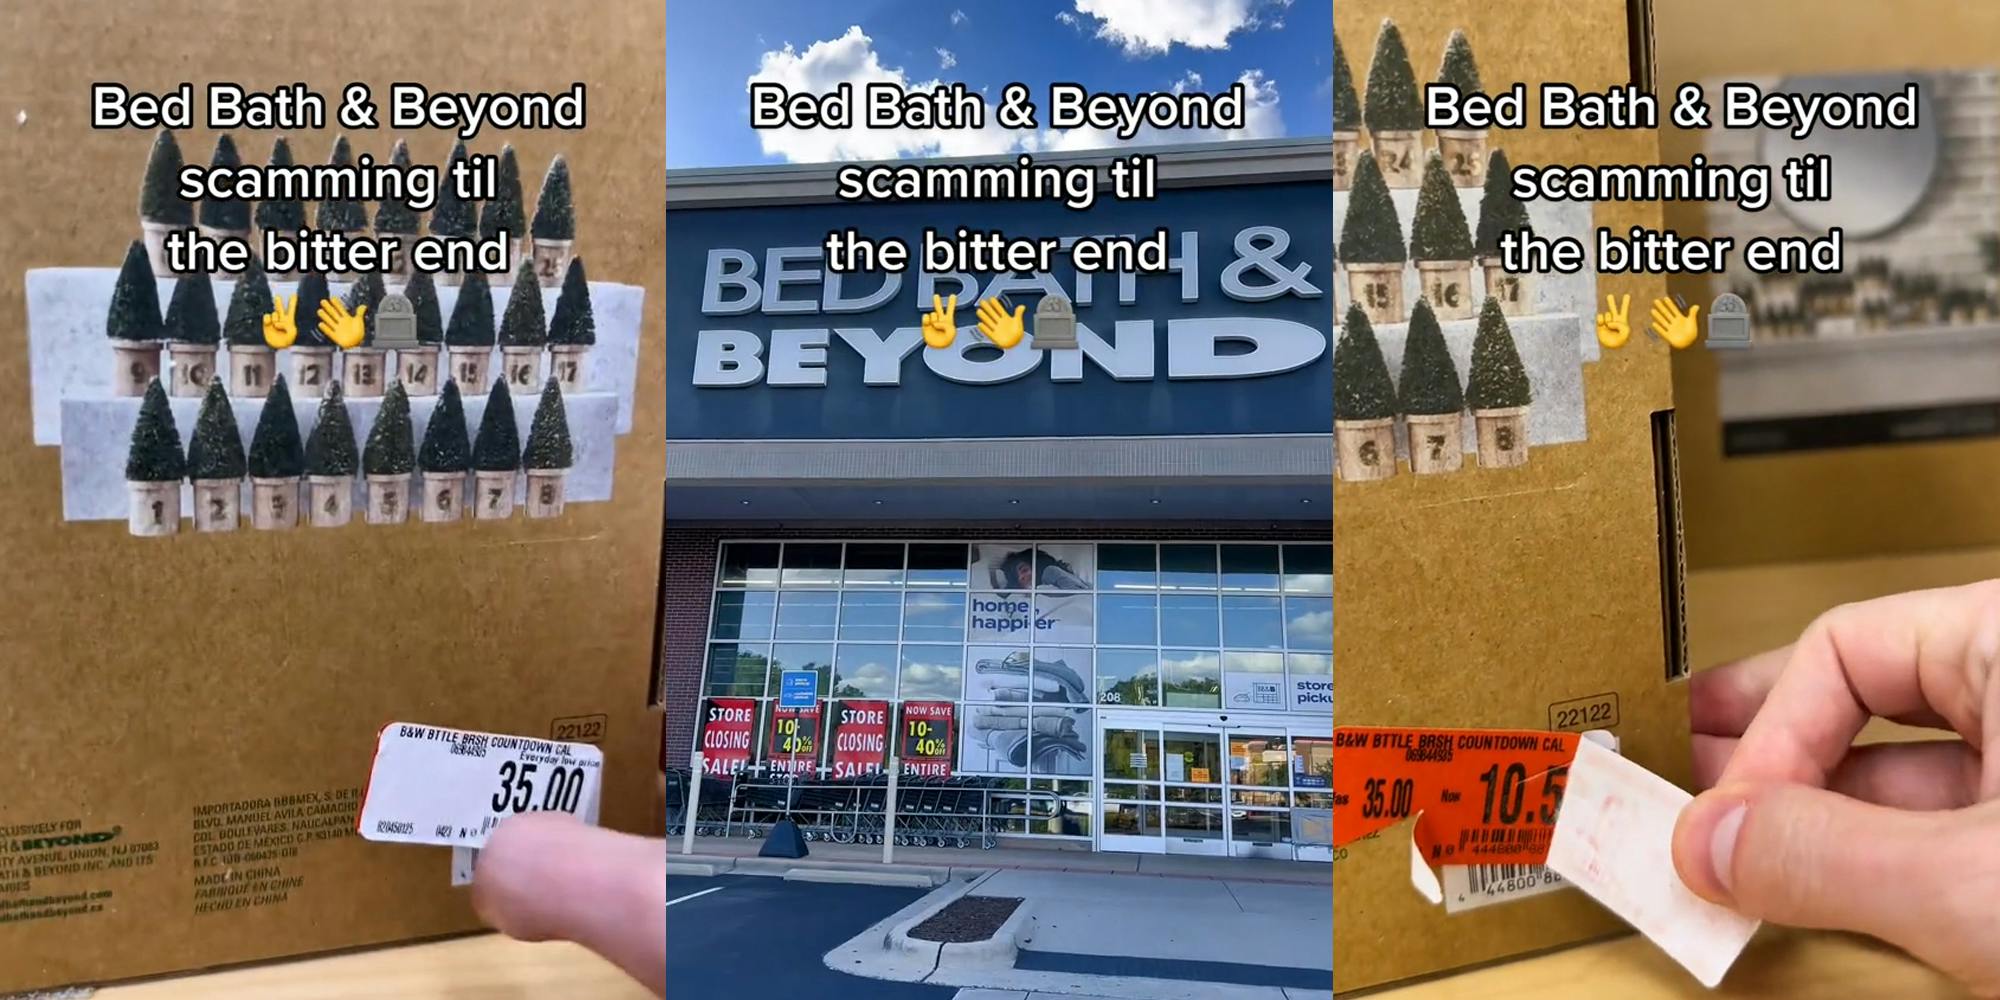 Bed Bath & Beyond item with $35 dollar price tag with caption "Bed Bath & Beyond scamming til the bitter end" (l) Bed Bath & Beyond entrance with signs with caption "Bed Bath & Beyond scamming til the bitter end" (c) Bed Bath & Beyond item with $35 dollar price tag being peeled to reveal $10 tag with caption "Bed Bath & Beyond scamming til the bitter end" (r)